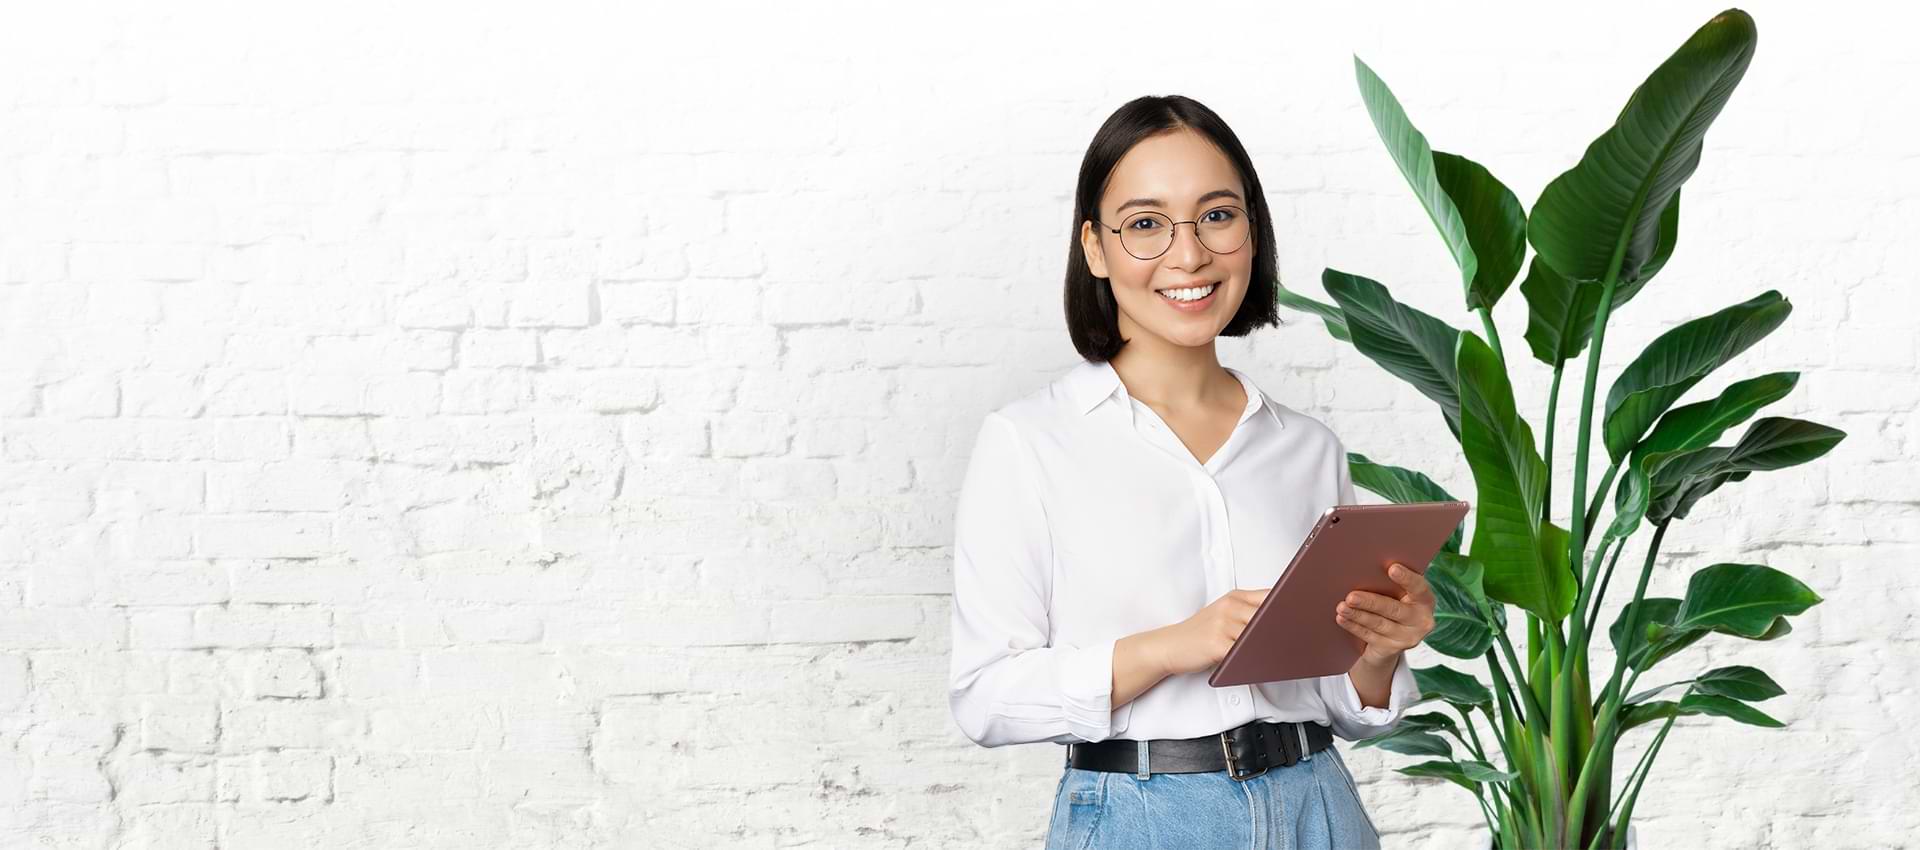 Woman holding a tablet with a white brick background standing next to a large plant